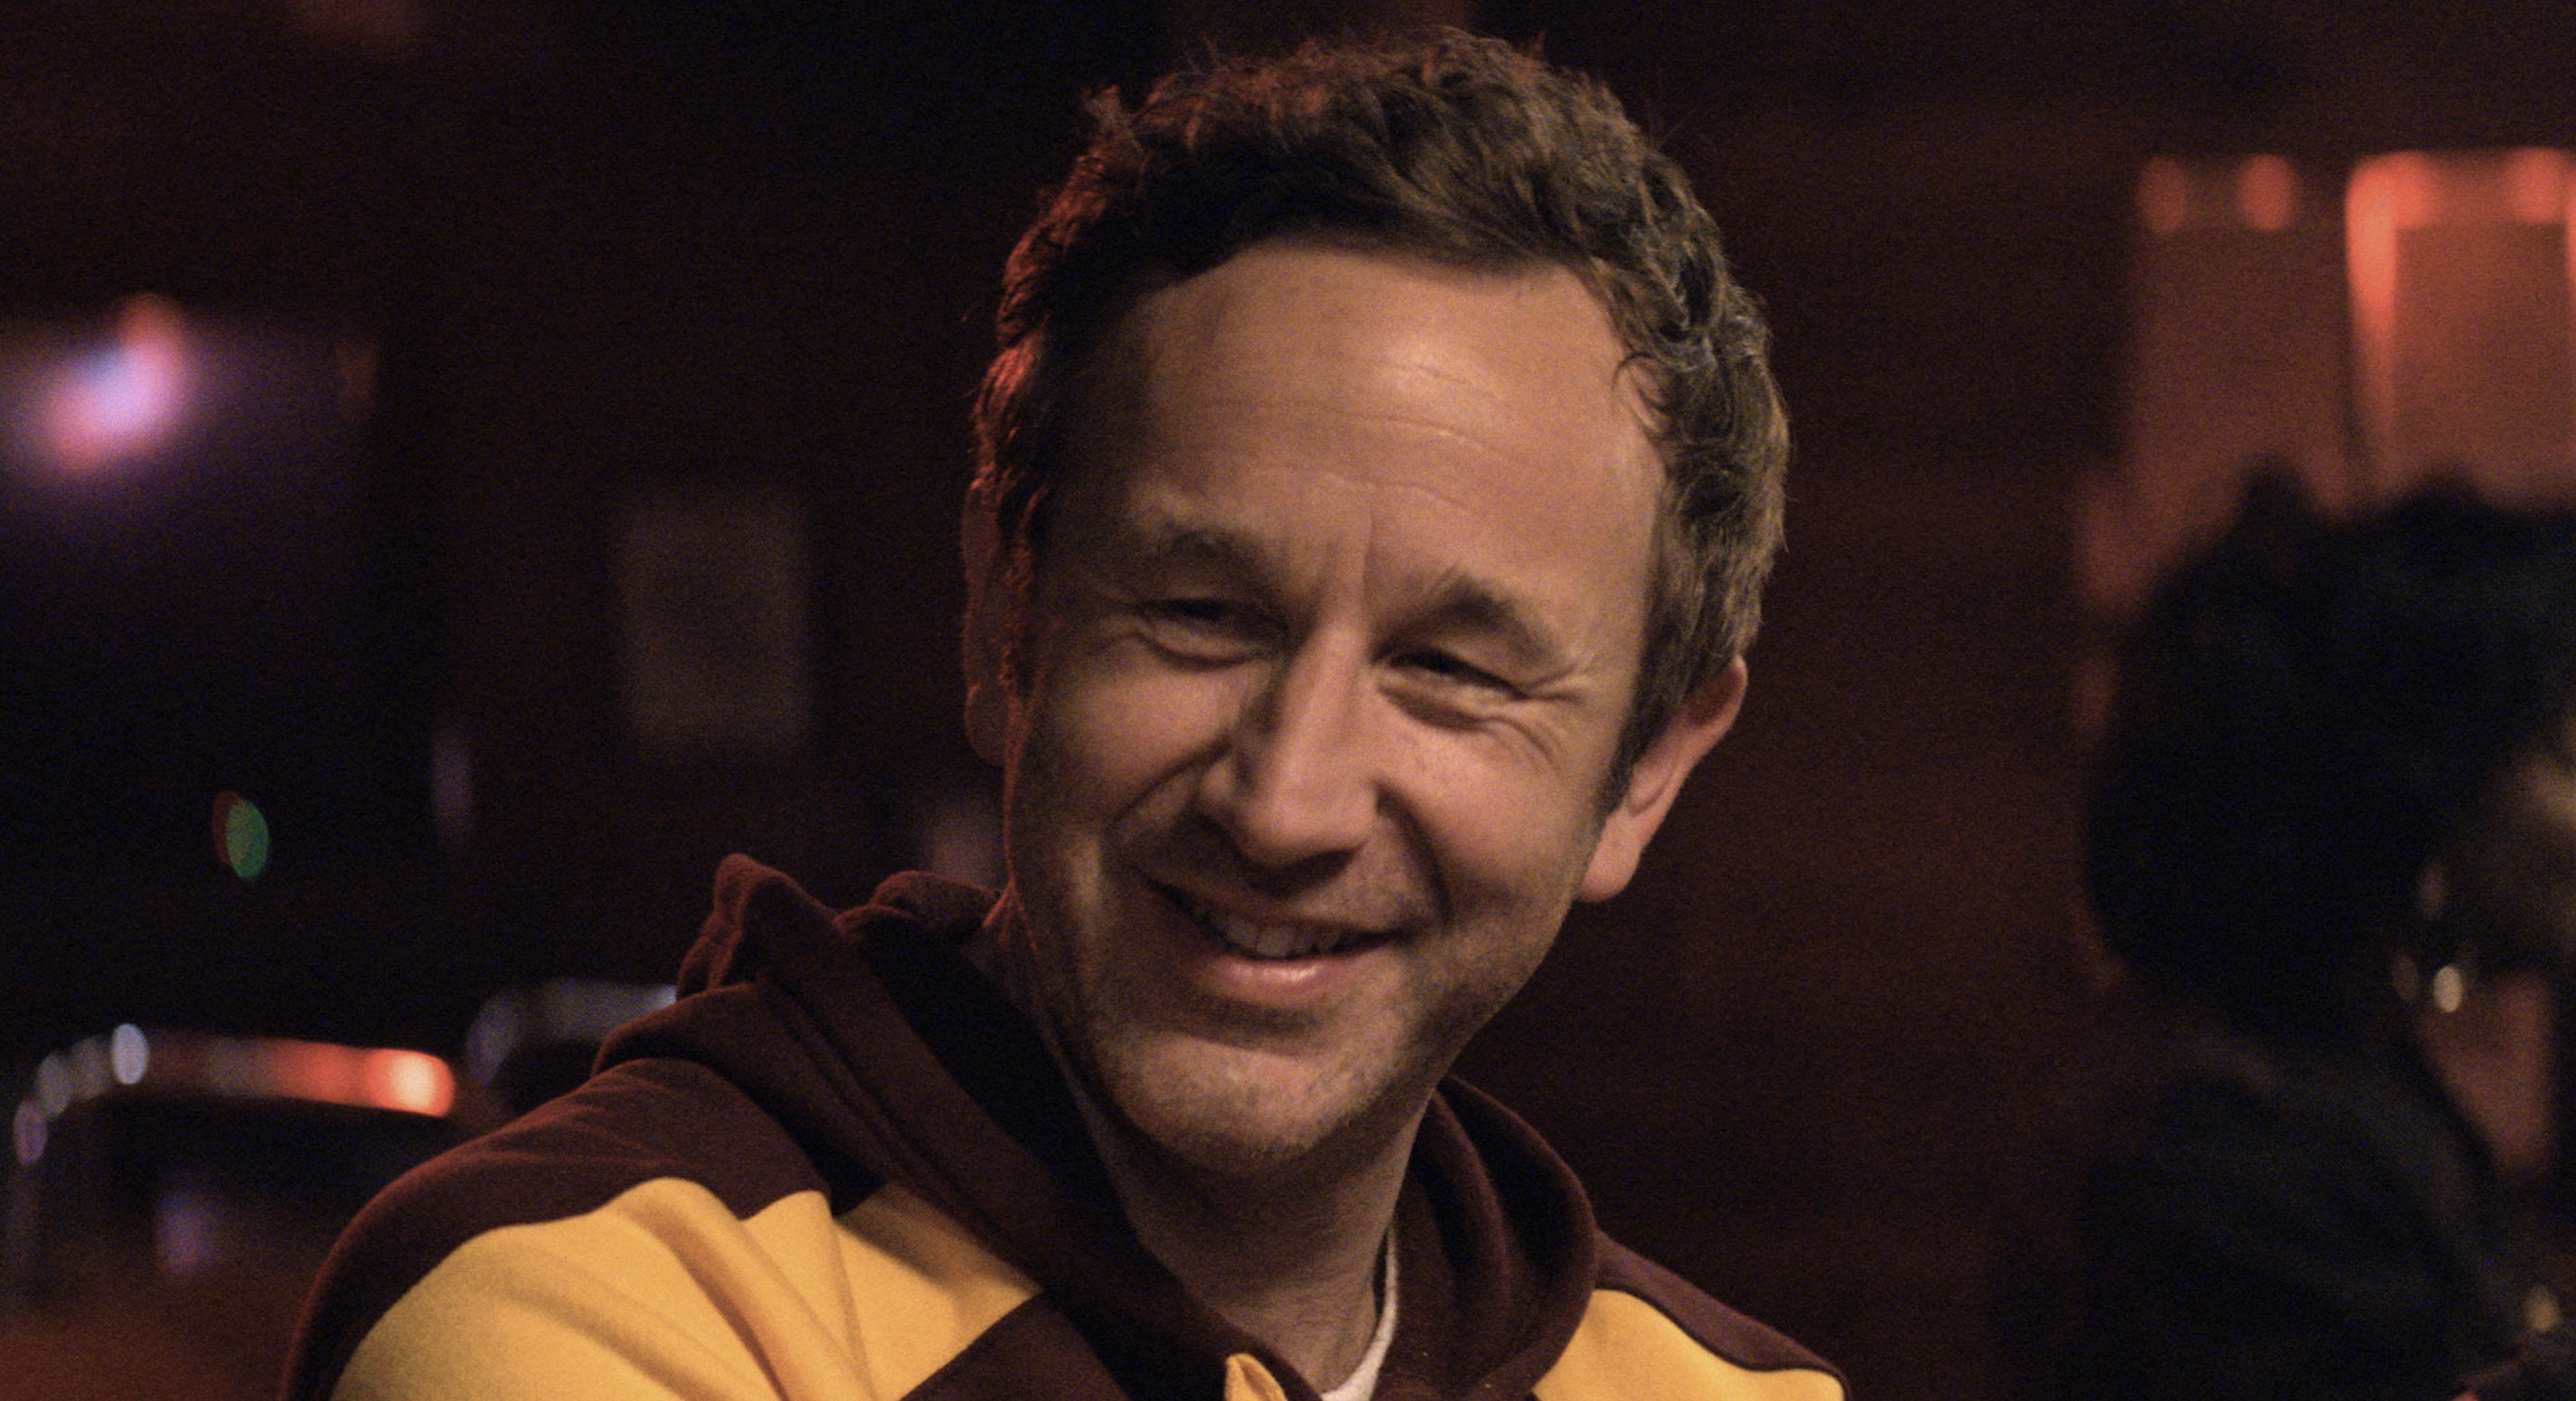 The Big Door Prize Cast on Apple TV+ - Chris O'Dowd as Dusty